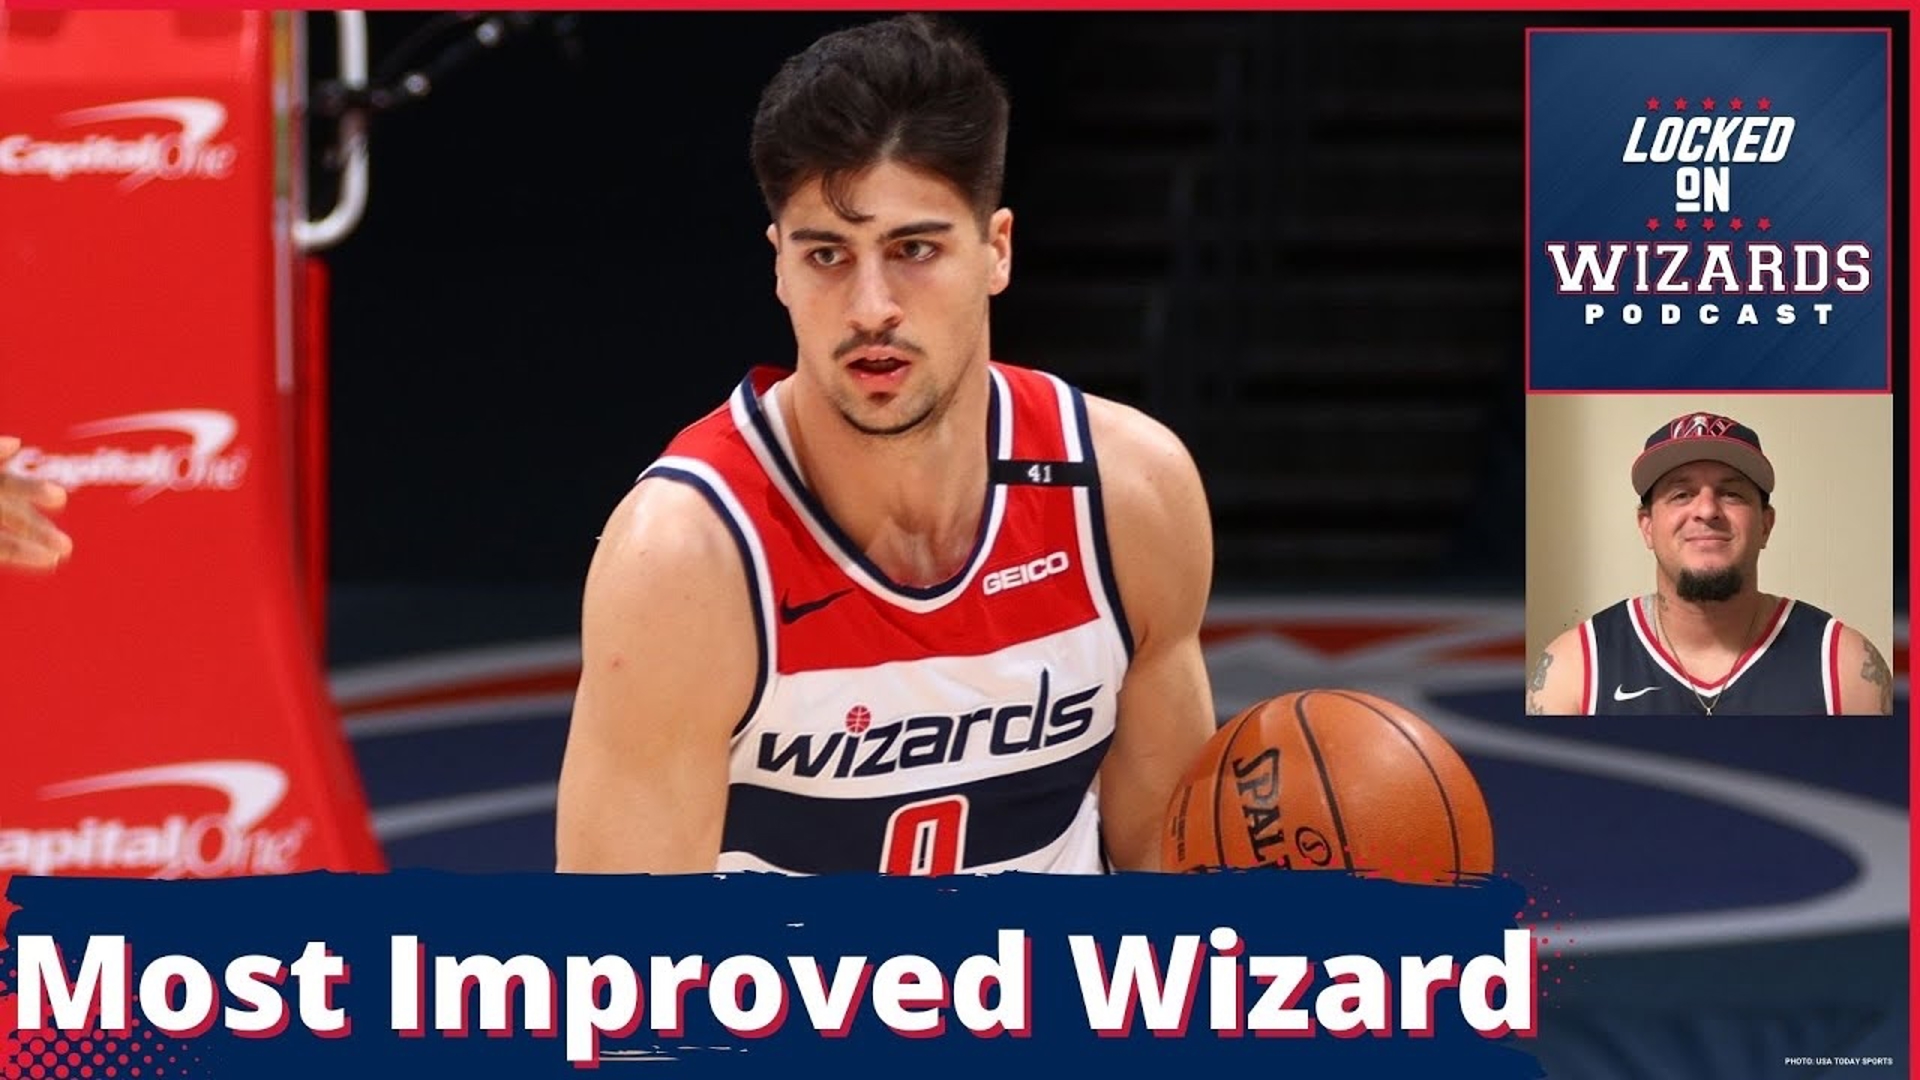 Brandon breaks down the candidates for the Most Improved Wizard this season.